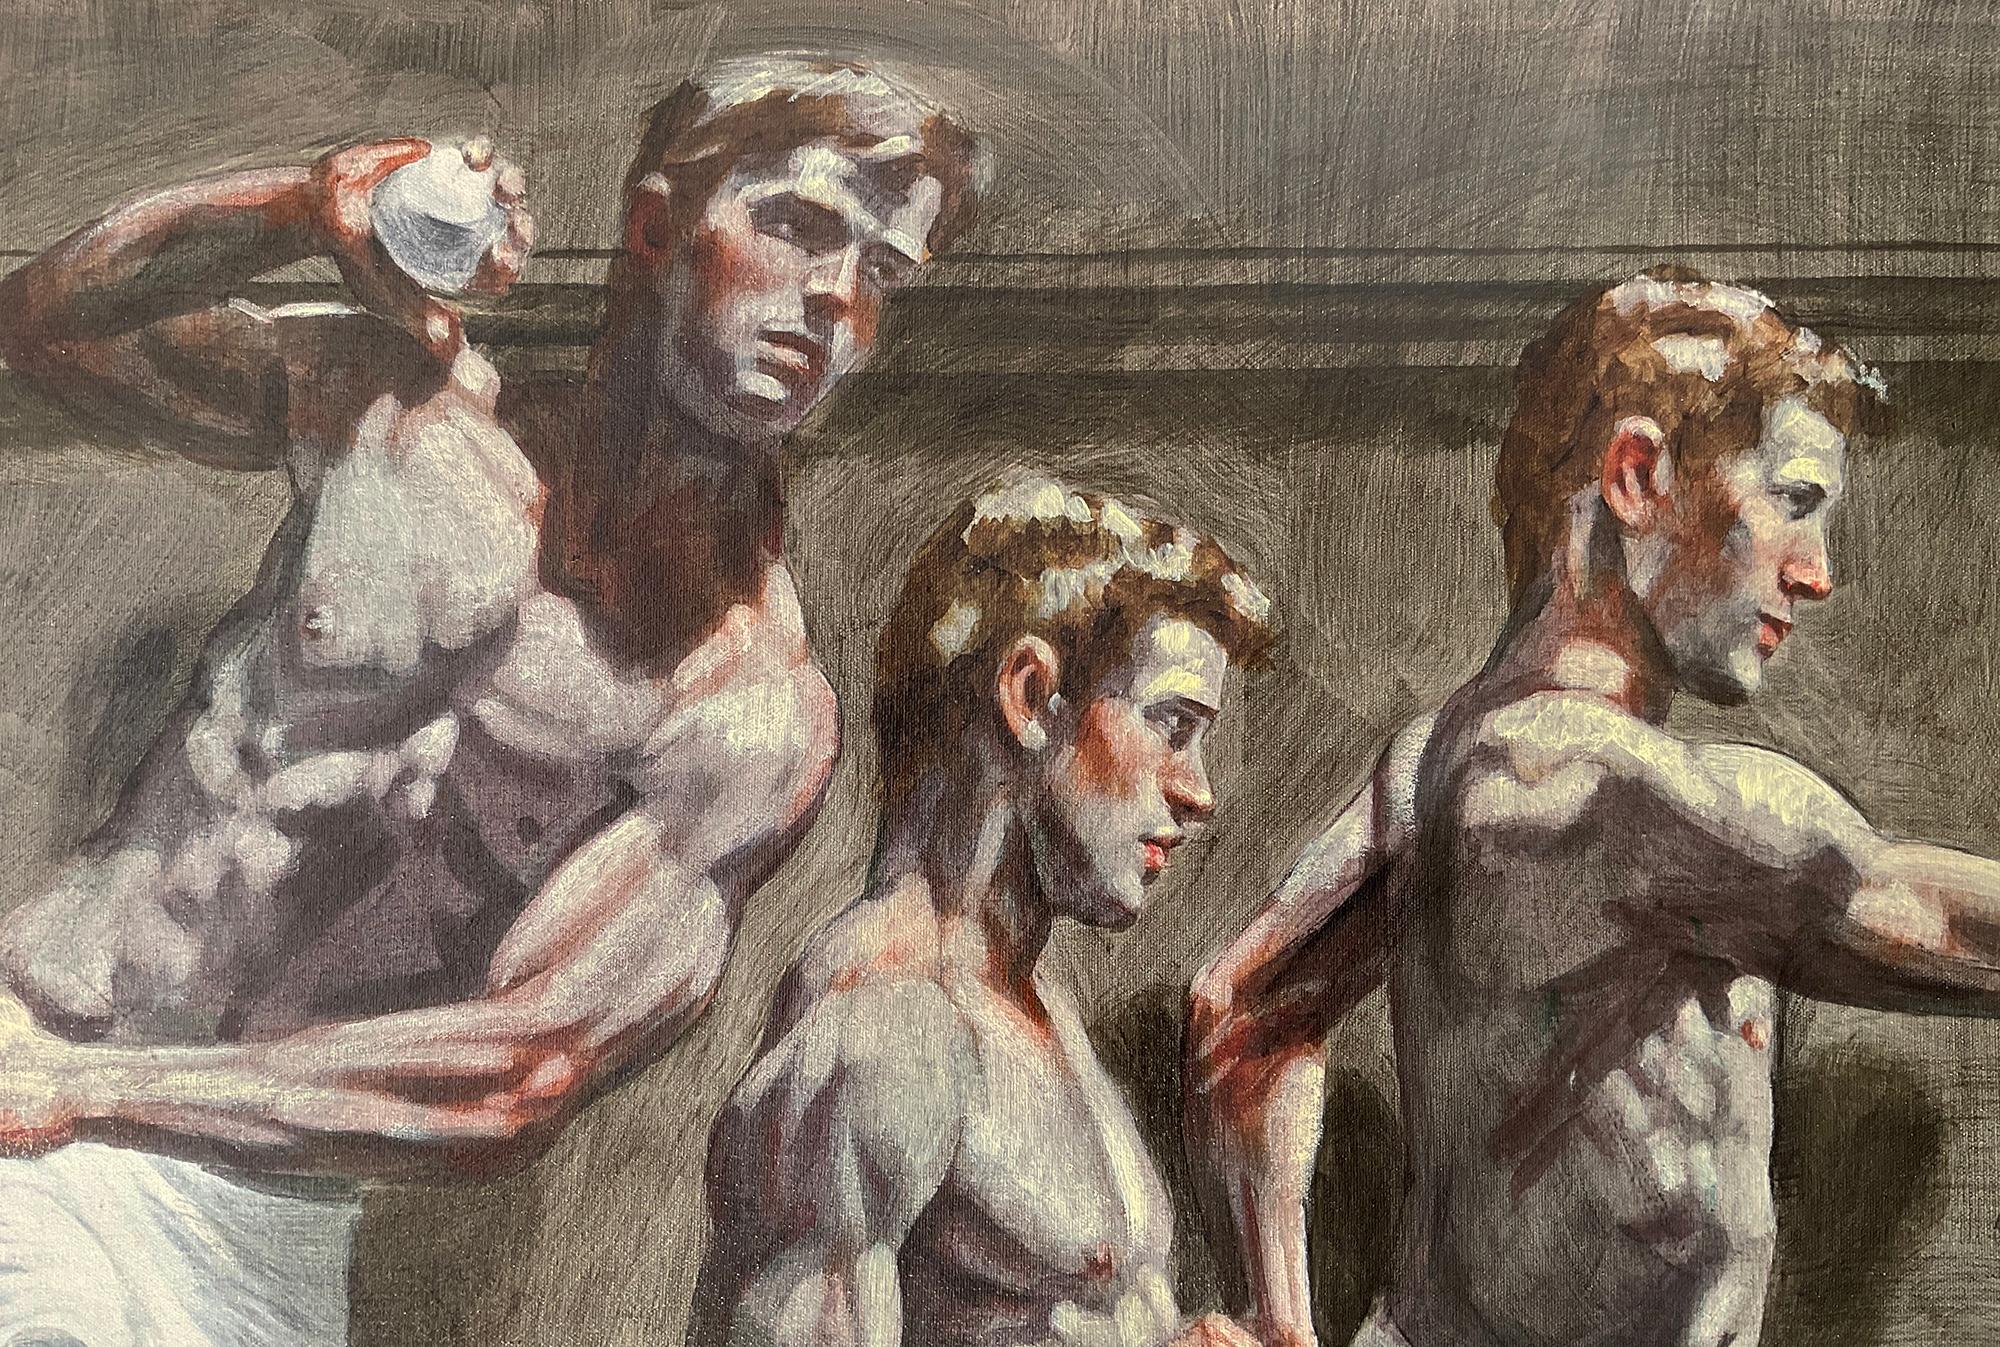 Frieze with Five Athletes (Mural of Young Men Running in Shorts by Mark Beard) 4